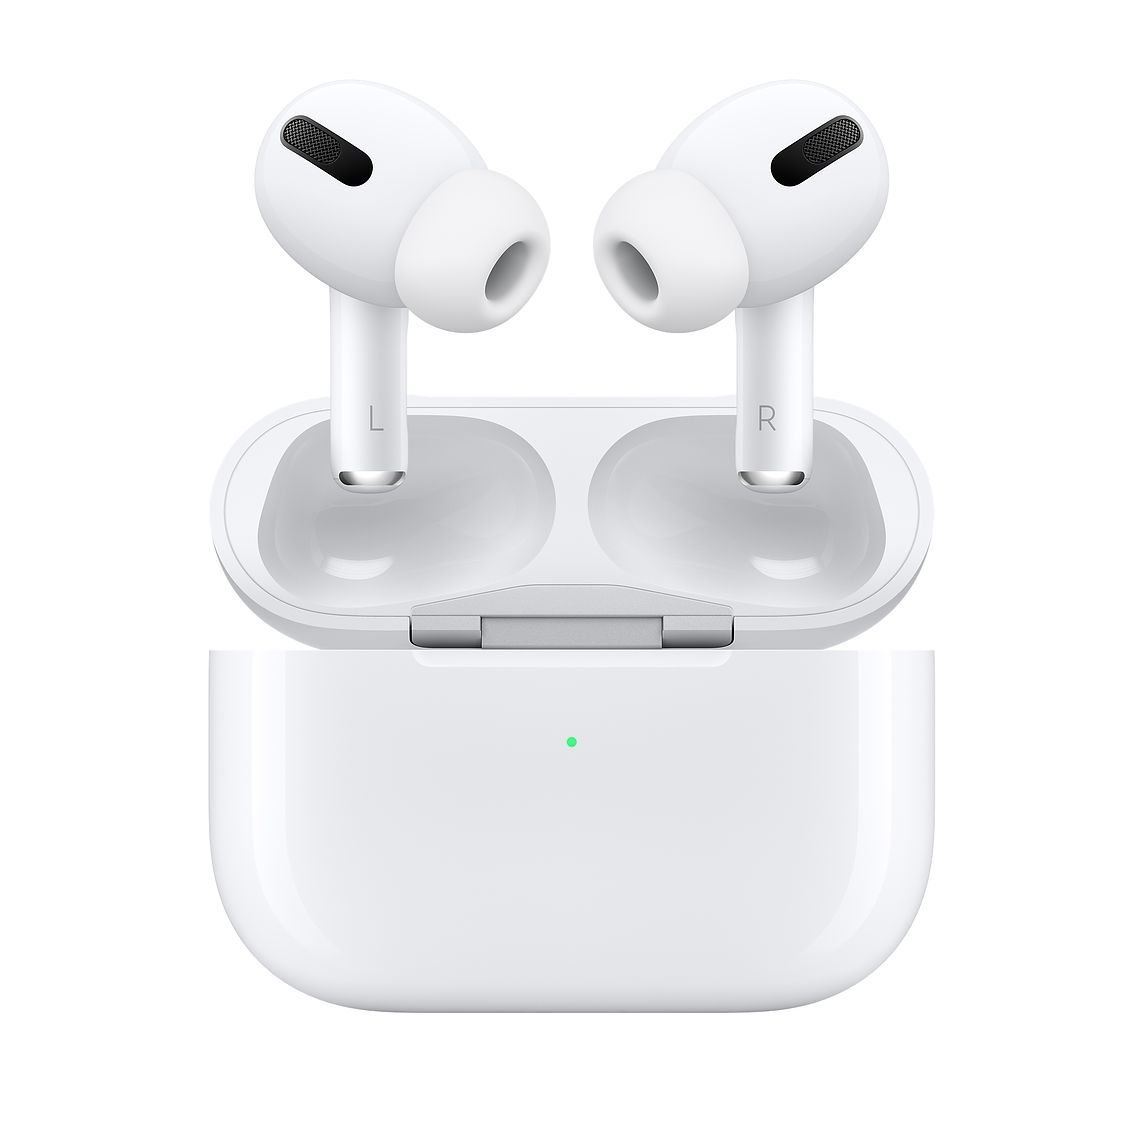 The AirPods Pro are a must if you're investing in any Apple device. These come with noise cancellation and apart from offering a simple pairing process, you can switch between multiple Apple devices as soon as you start using them.